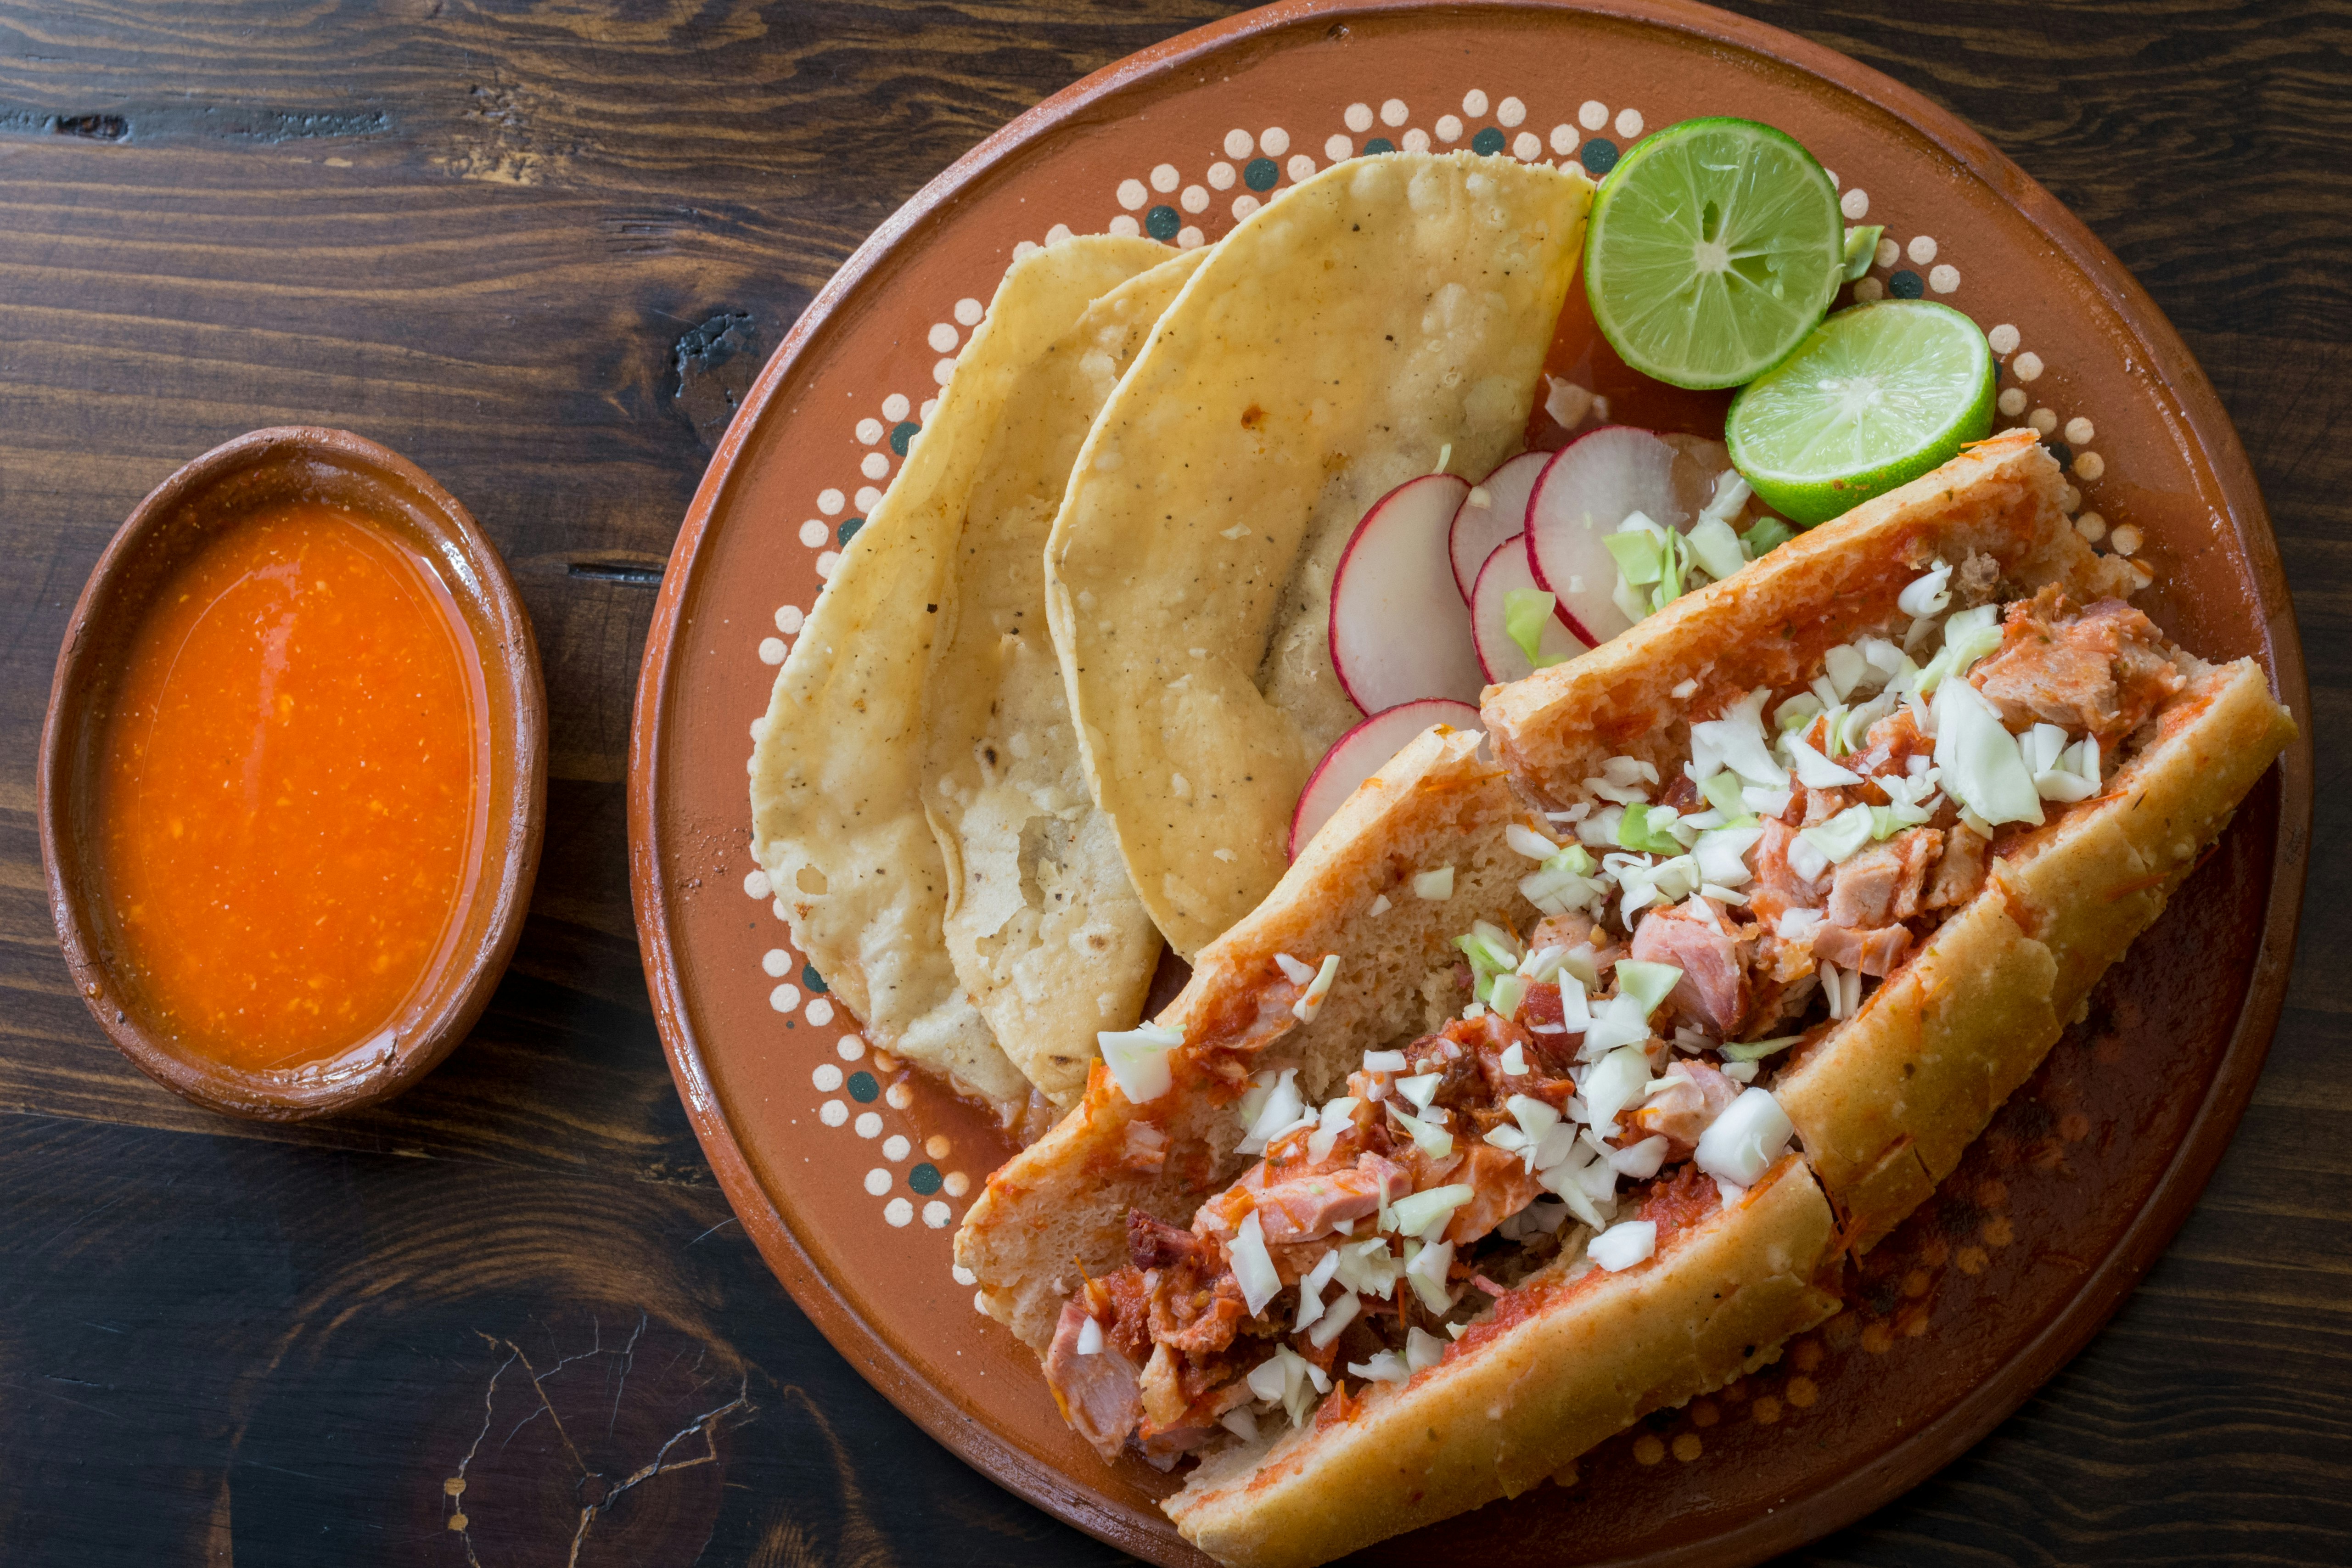 A tortas ahogadas sandwich, sitting in tomato-based sauce on a terracotta plate with tacos, and sliced limes.